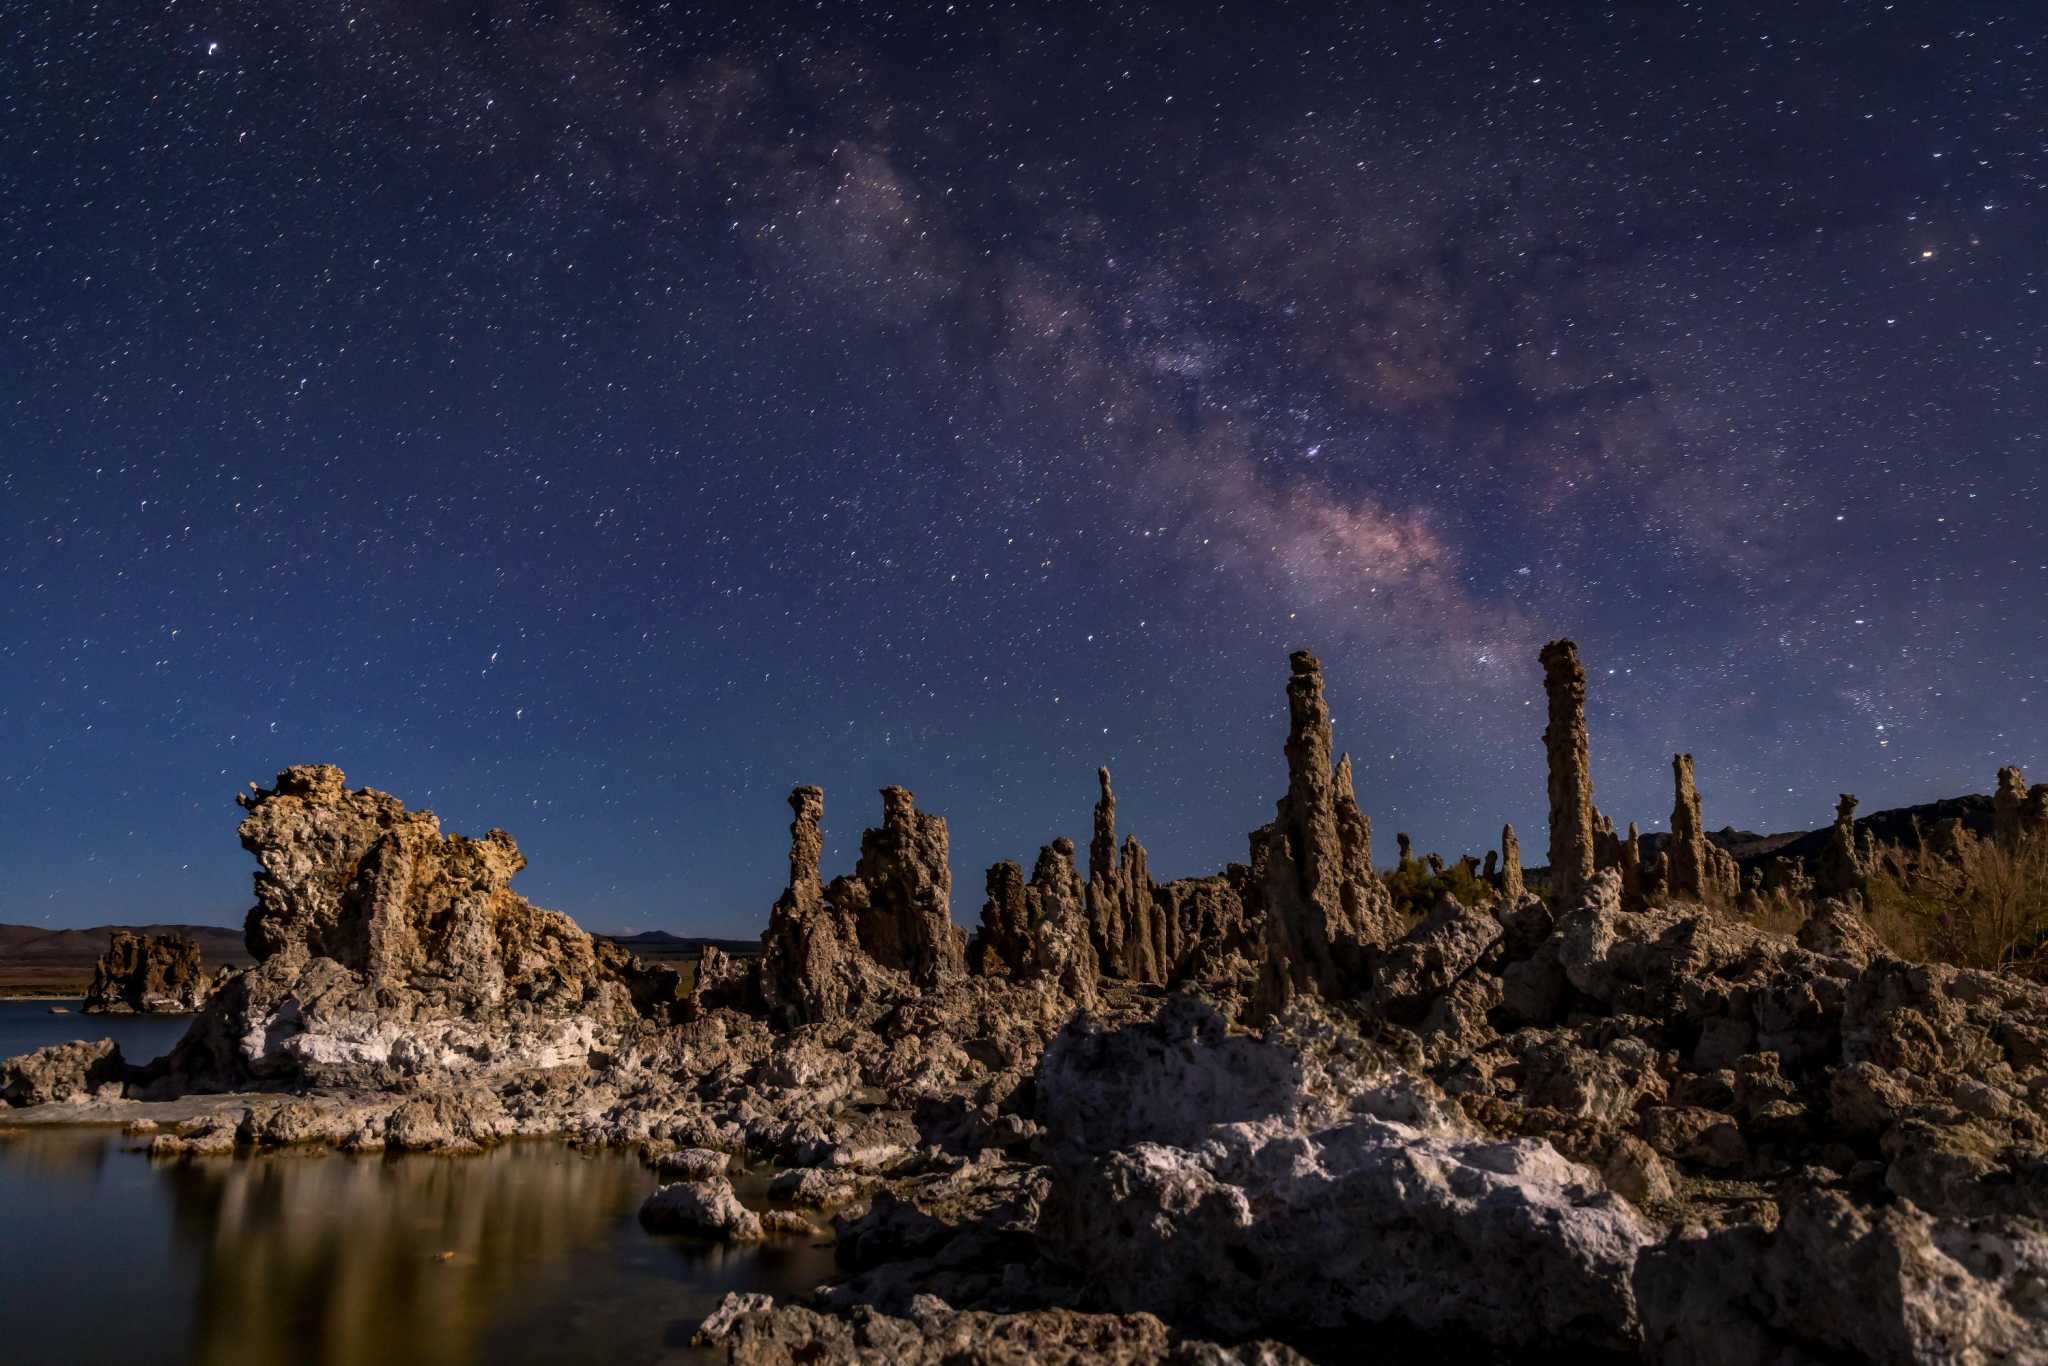 Mono Lake was supposed to have been saved from going dry. Now, the